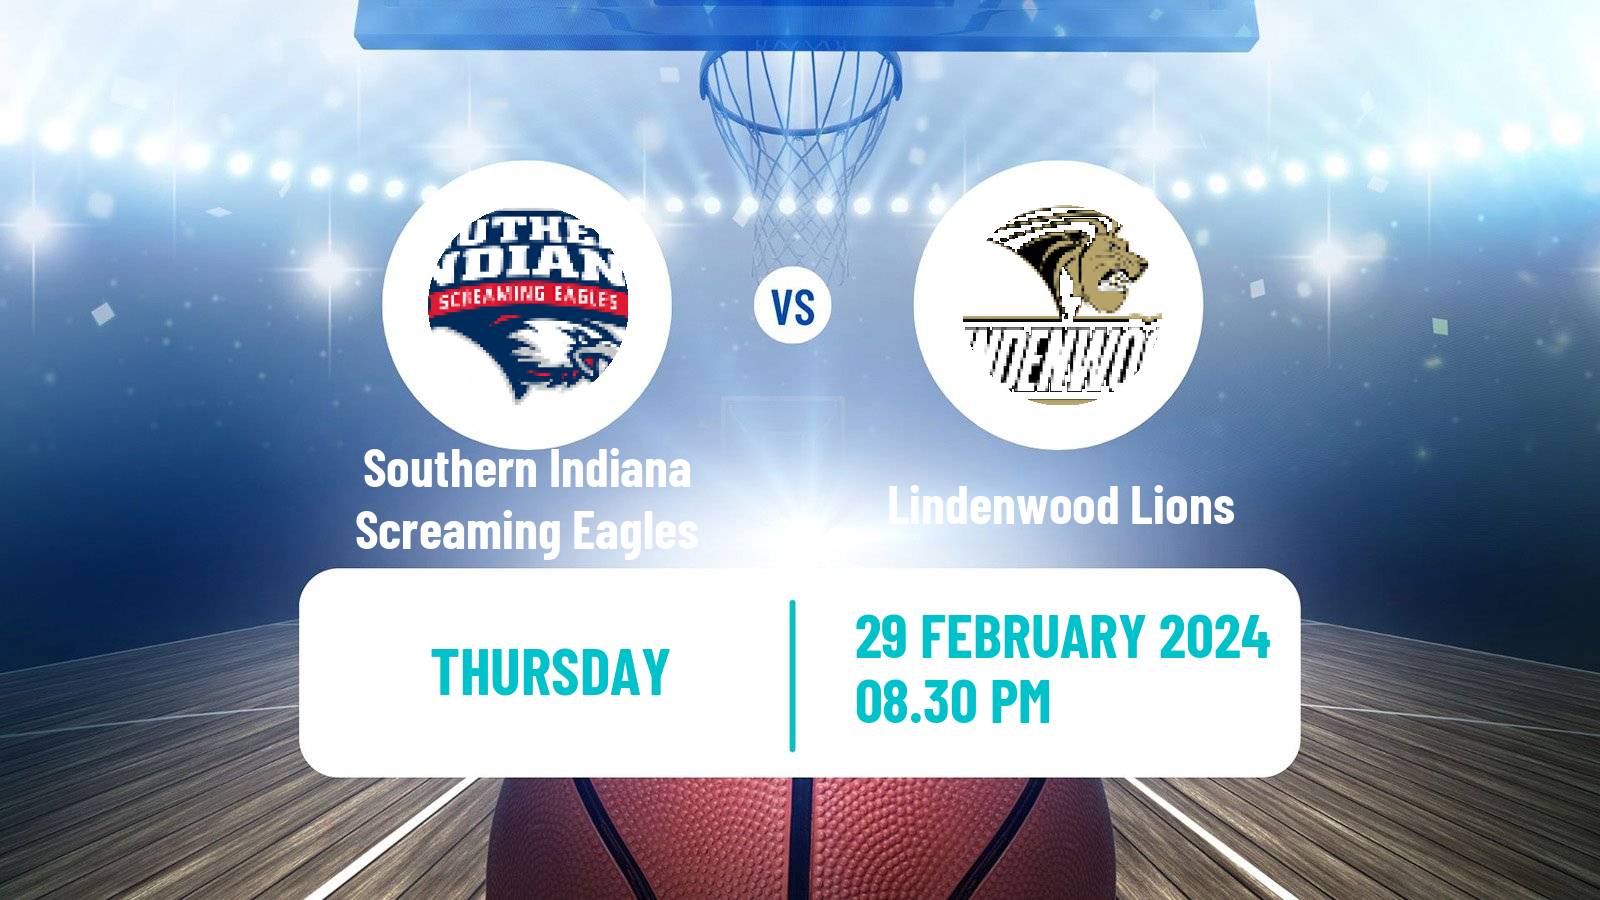 Basketball NCAA College Basketball Southern Indiana Screaming Eagles - Lindenwood Lions